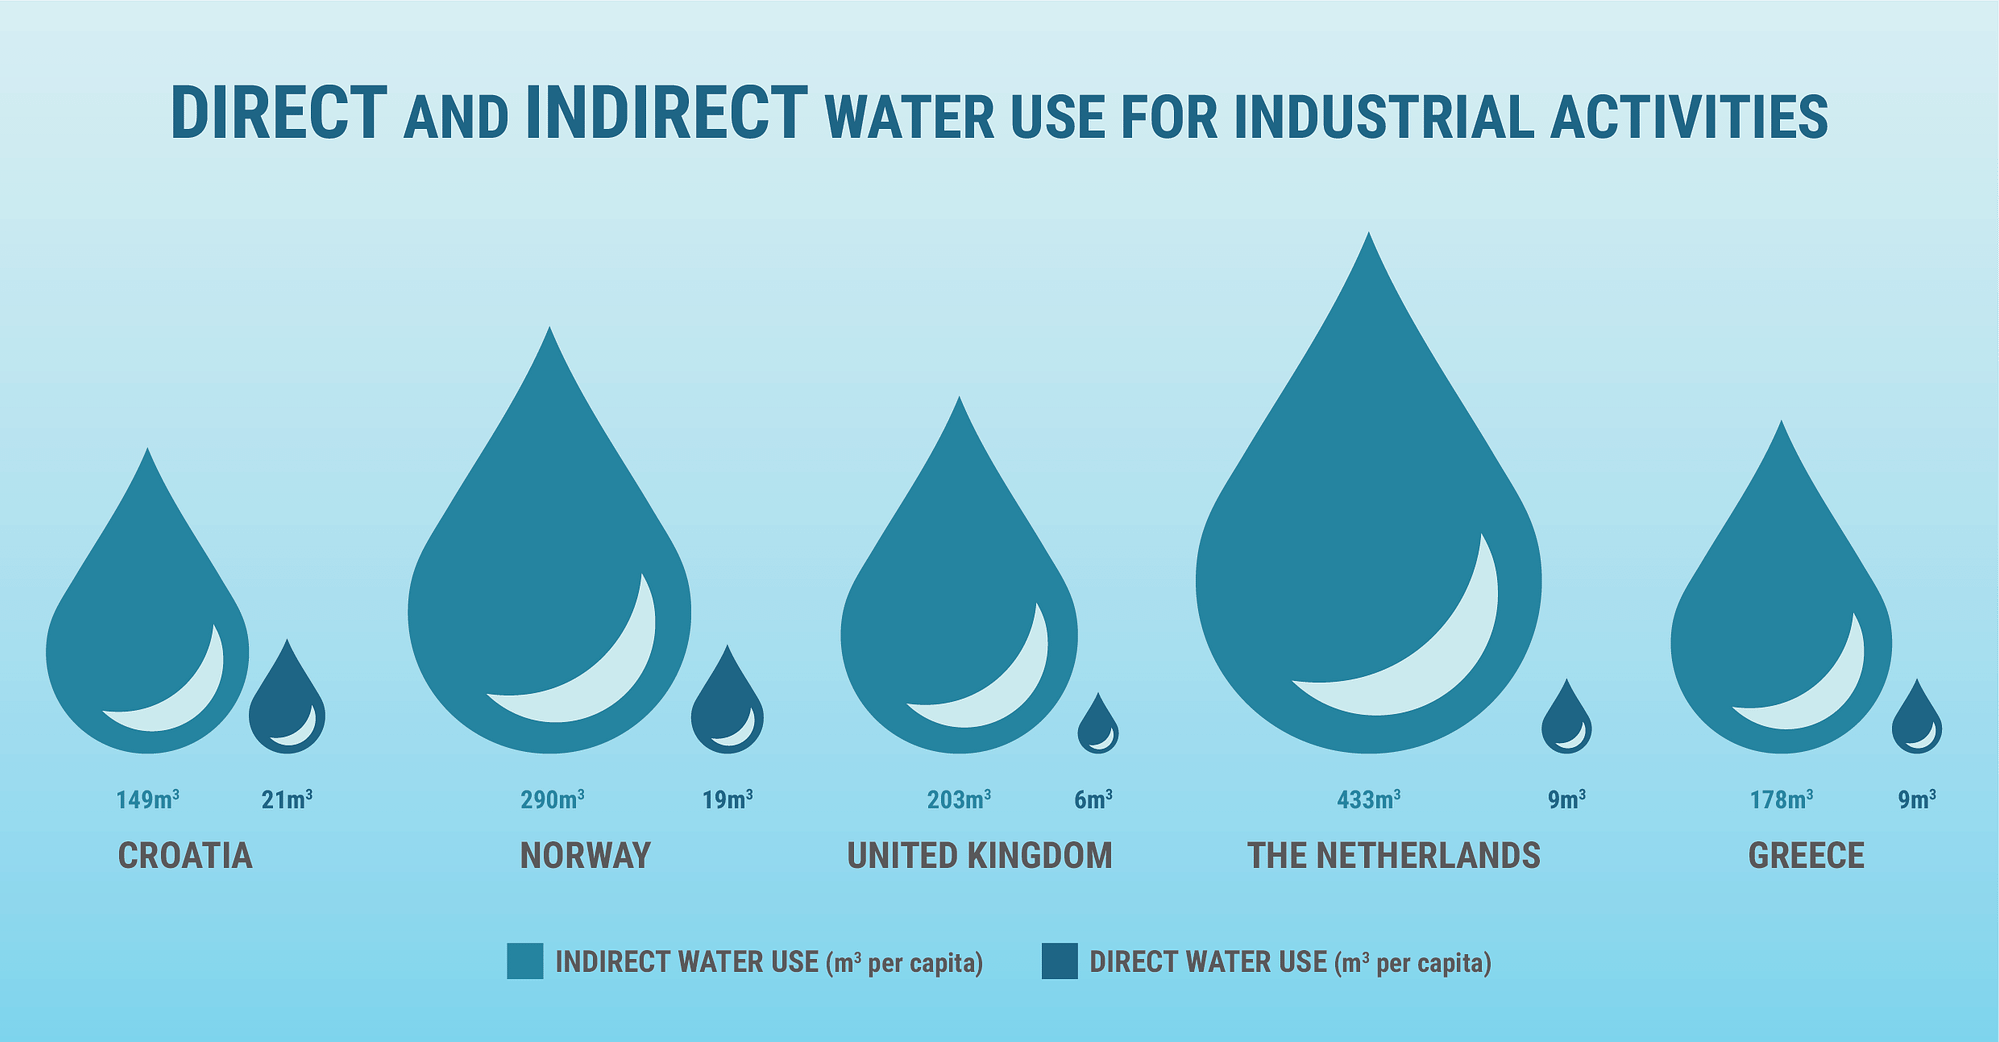 direct vs indirect impacts of water use in industrial activities, per country